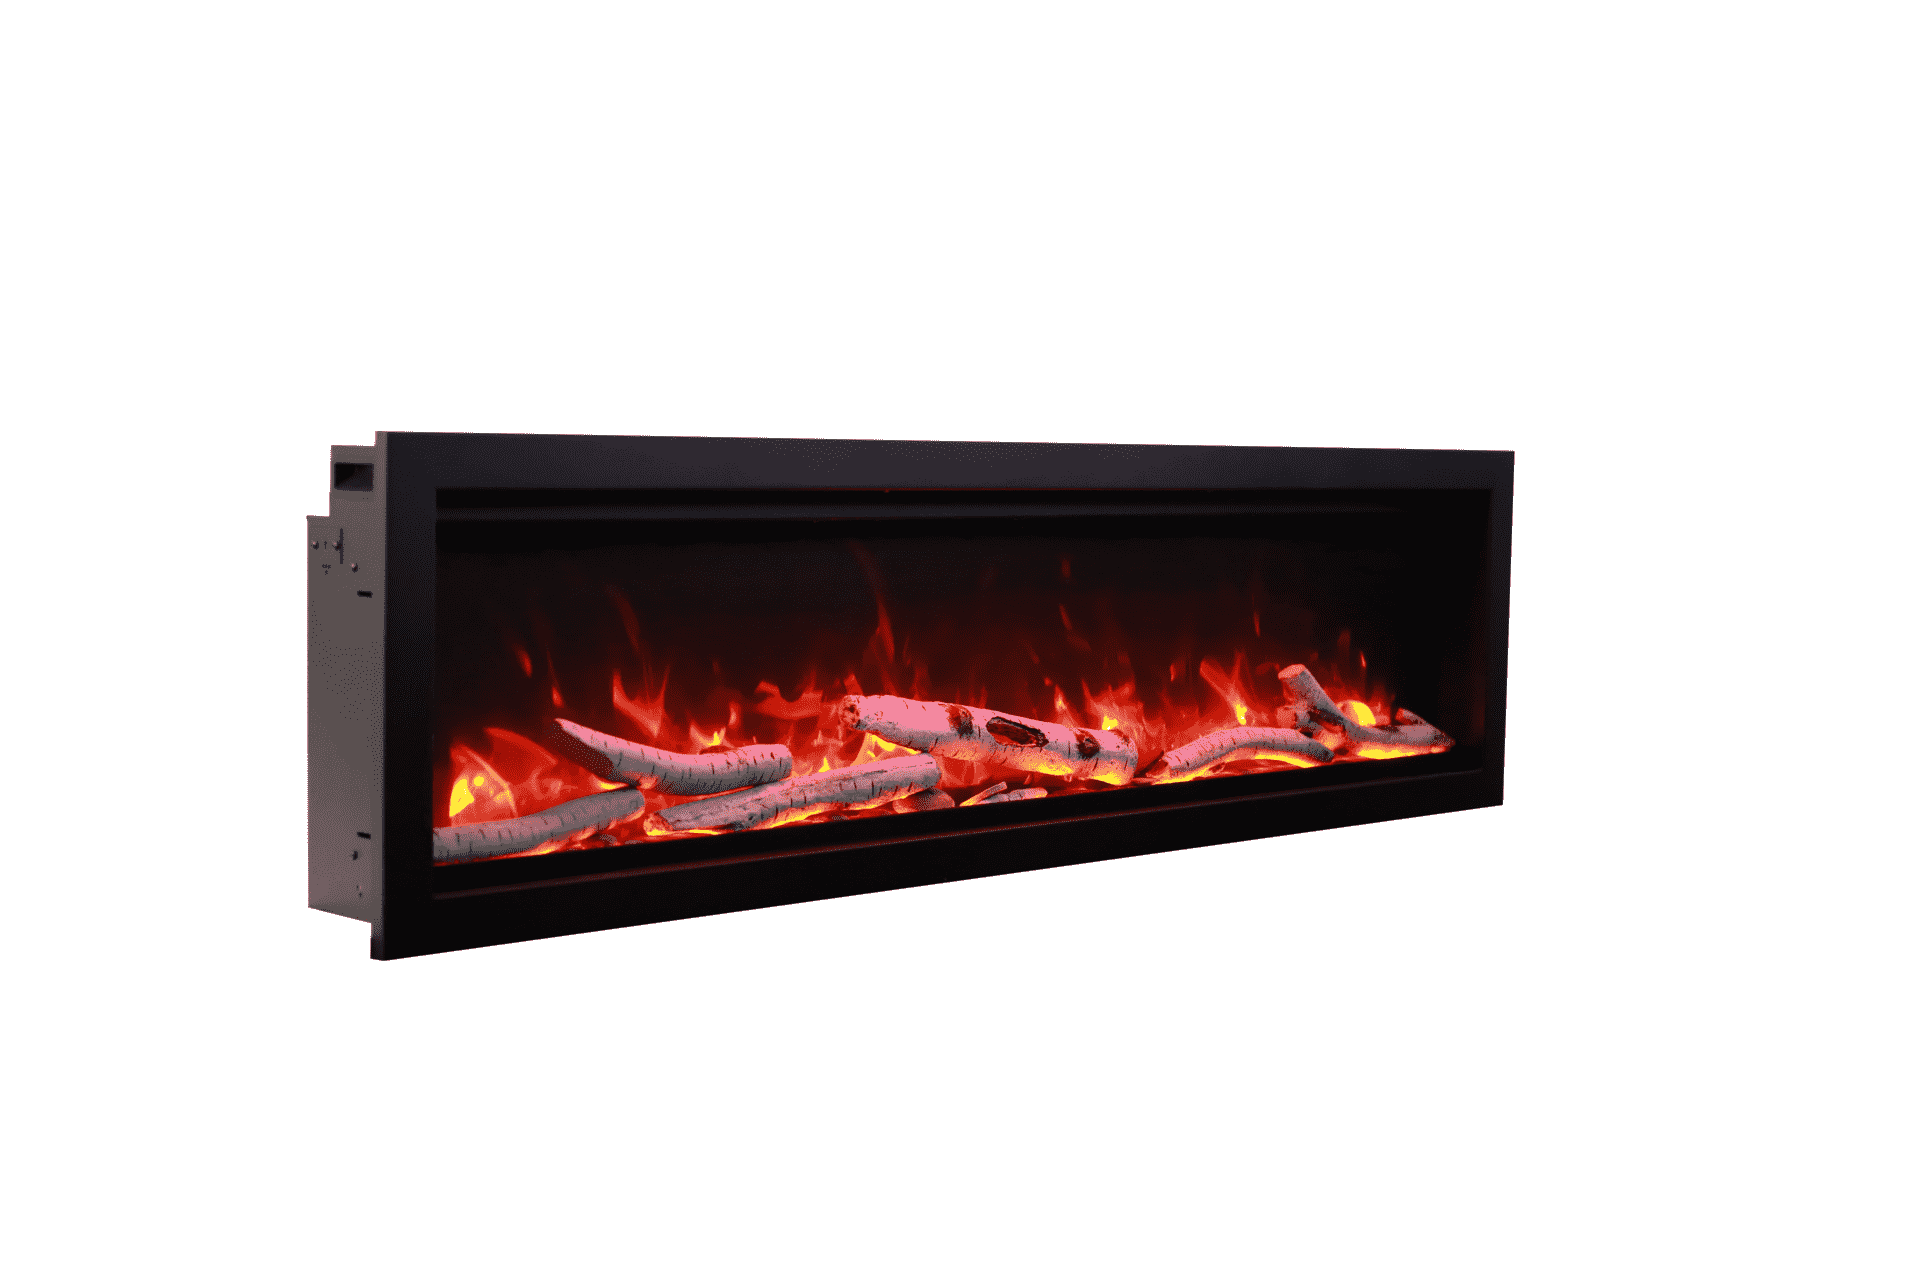 Amantii 88" Symmetry 3.0 Built-in Smart WiFi Electric Fireplace -SYM-88- Left View